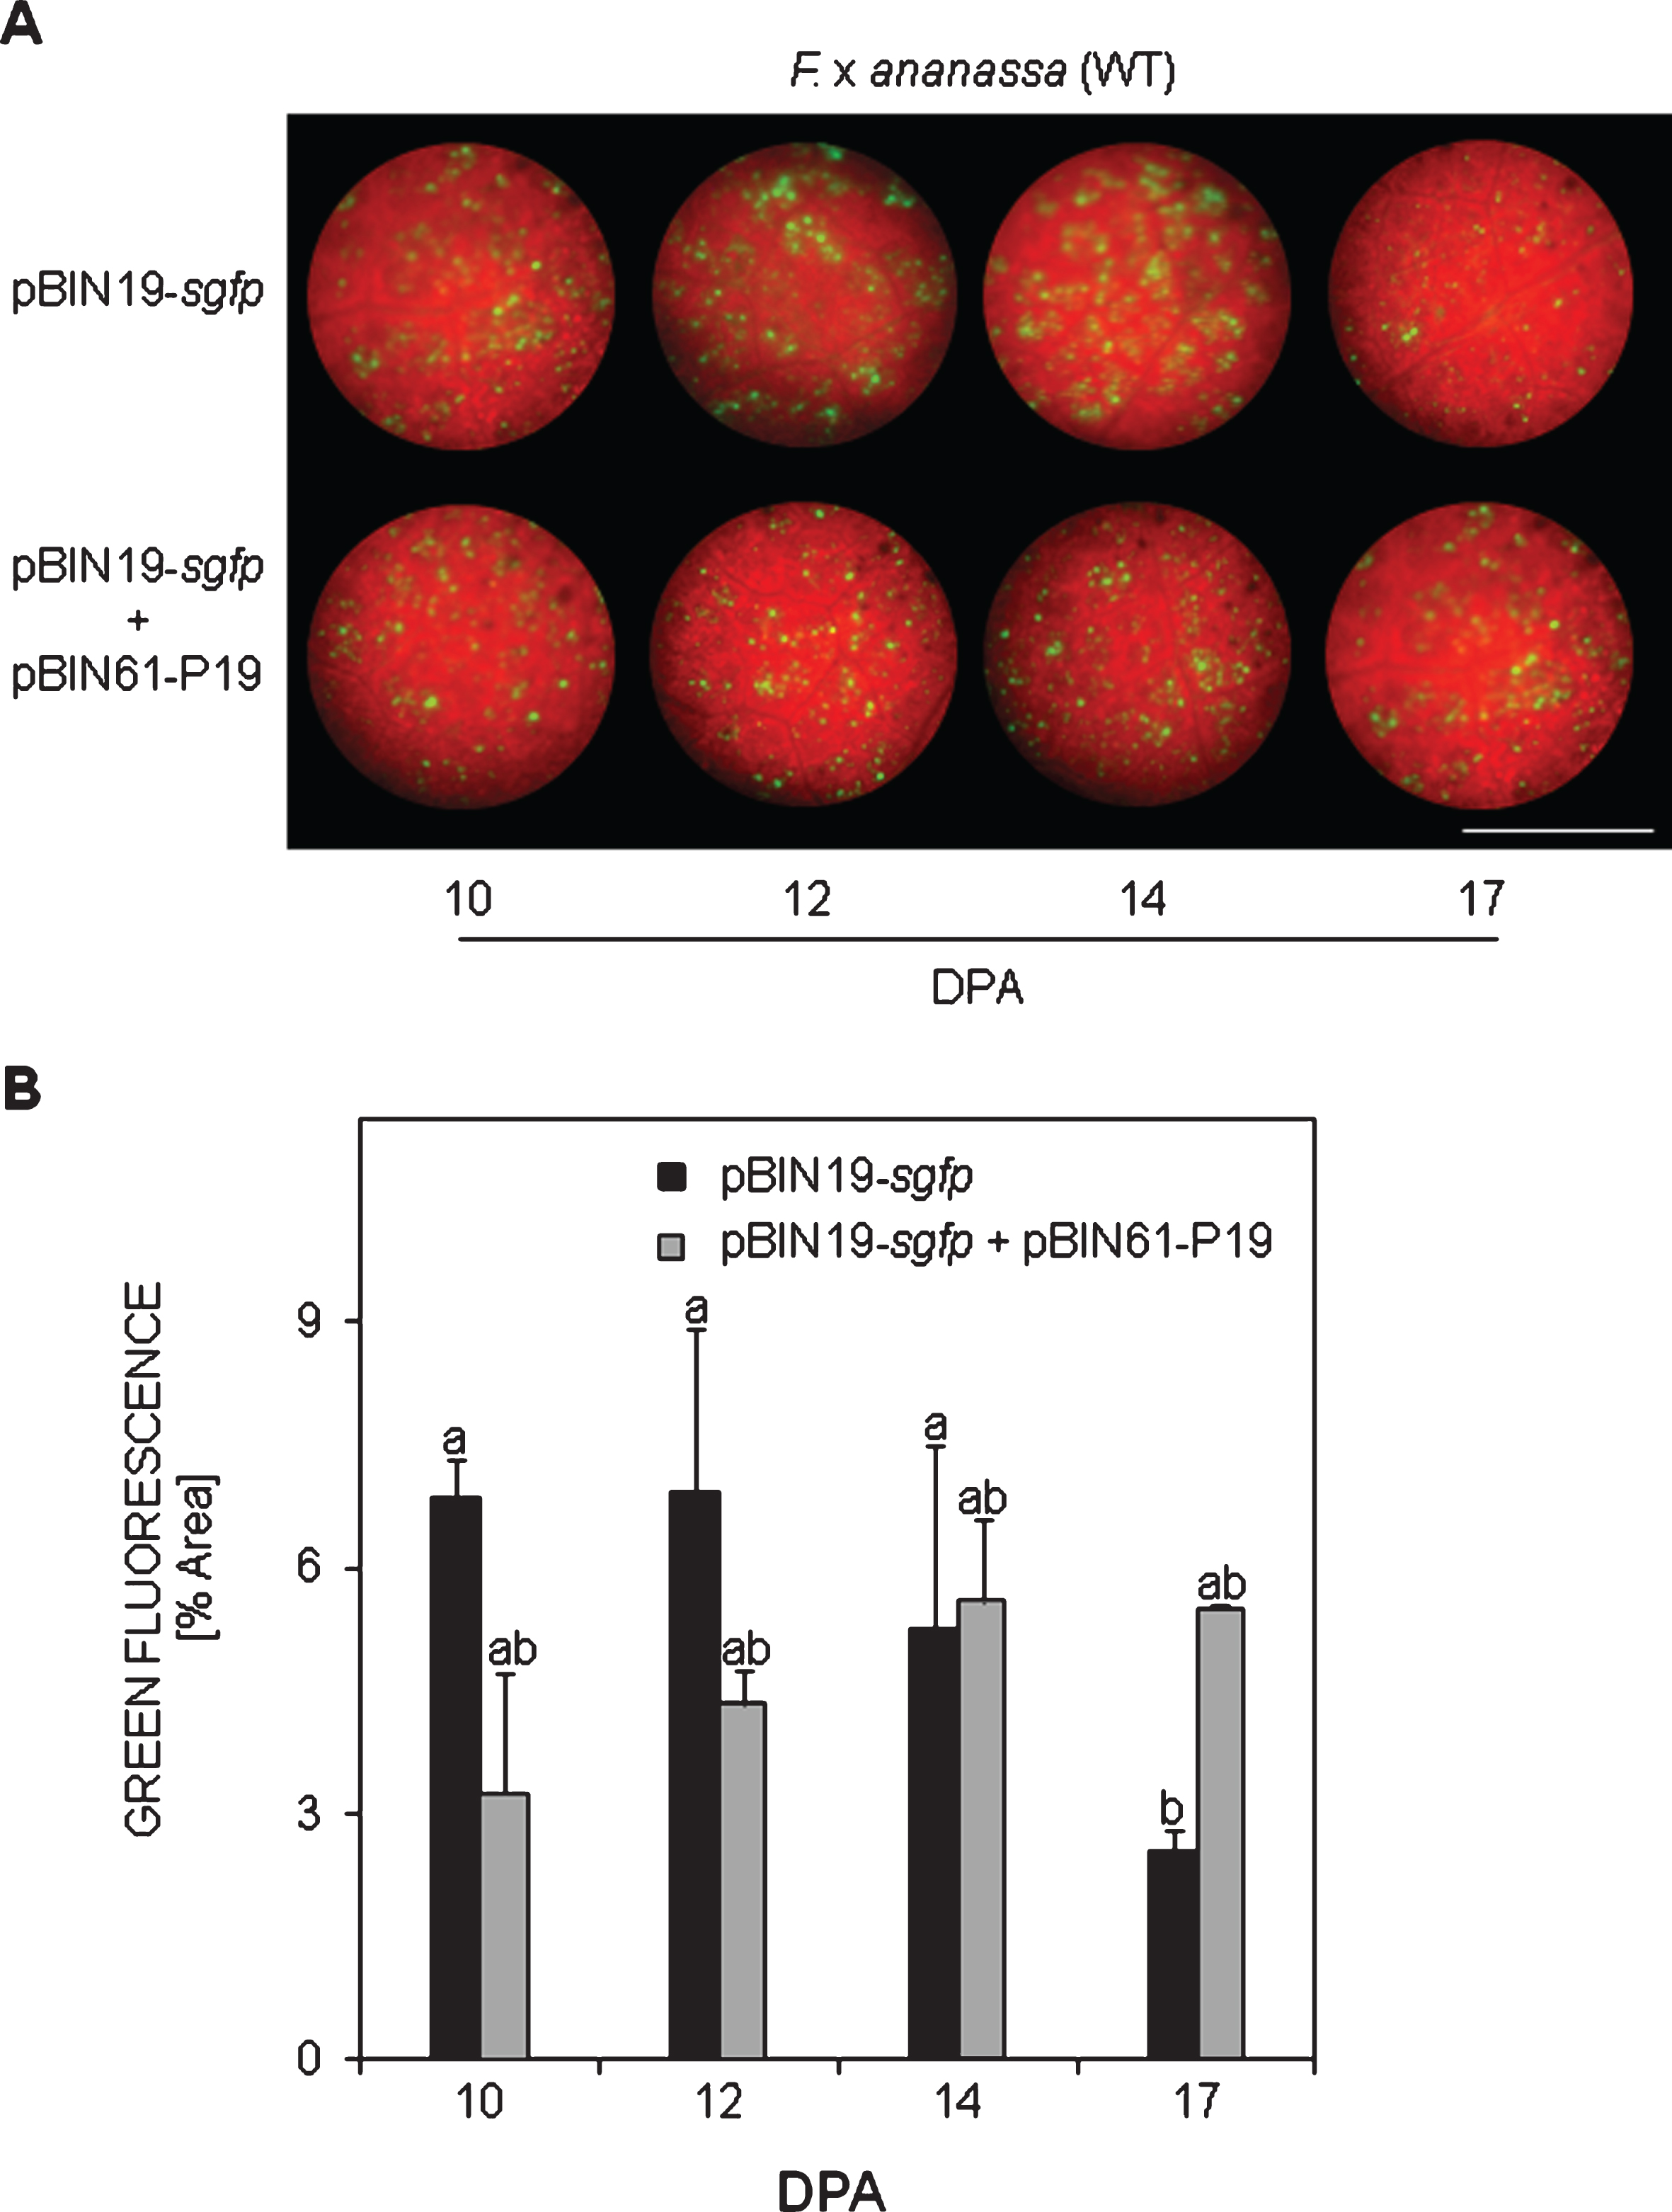 In planta suppression of intrinsic sgfp silencing in WT F. x ananassa leaves. A) Restoring of green fluorescence by the silencing suppressor protein P19 after agroinfiltration with a co-culture of pBIN19-sgfp + pBIN61-P19, compared towards the transient expression positive control pBIN19-sgfp at different days post agroinfiltration (DPA). B) Quantification of green fluorescence. Means±SEs are represented from one assay (n = 12). Analysis of variance (ANOVA) followed by LSD-Fisher test was performed. Different letters represent statistically significant differences (P≤0.10). Bar = 0.9 mm.